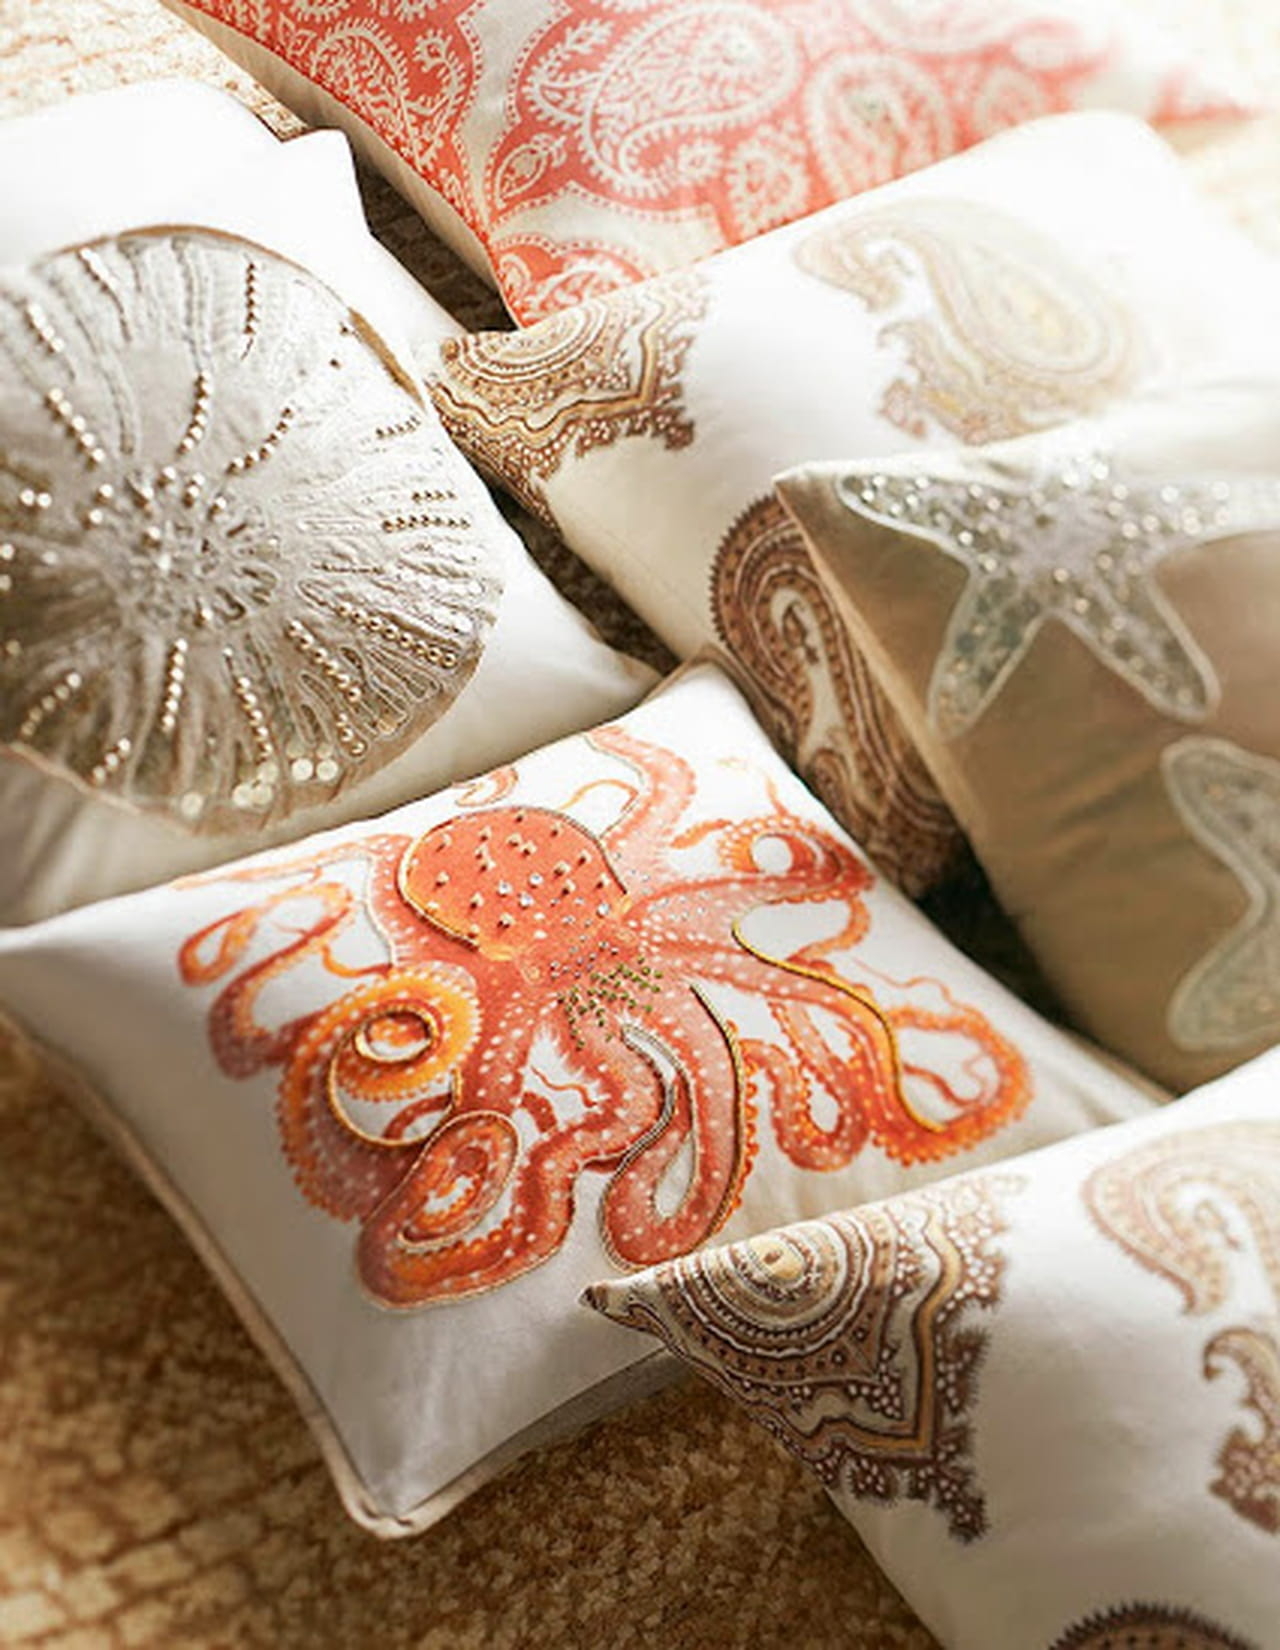 La paz jeweled octopus embroidered pillow covers